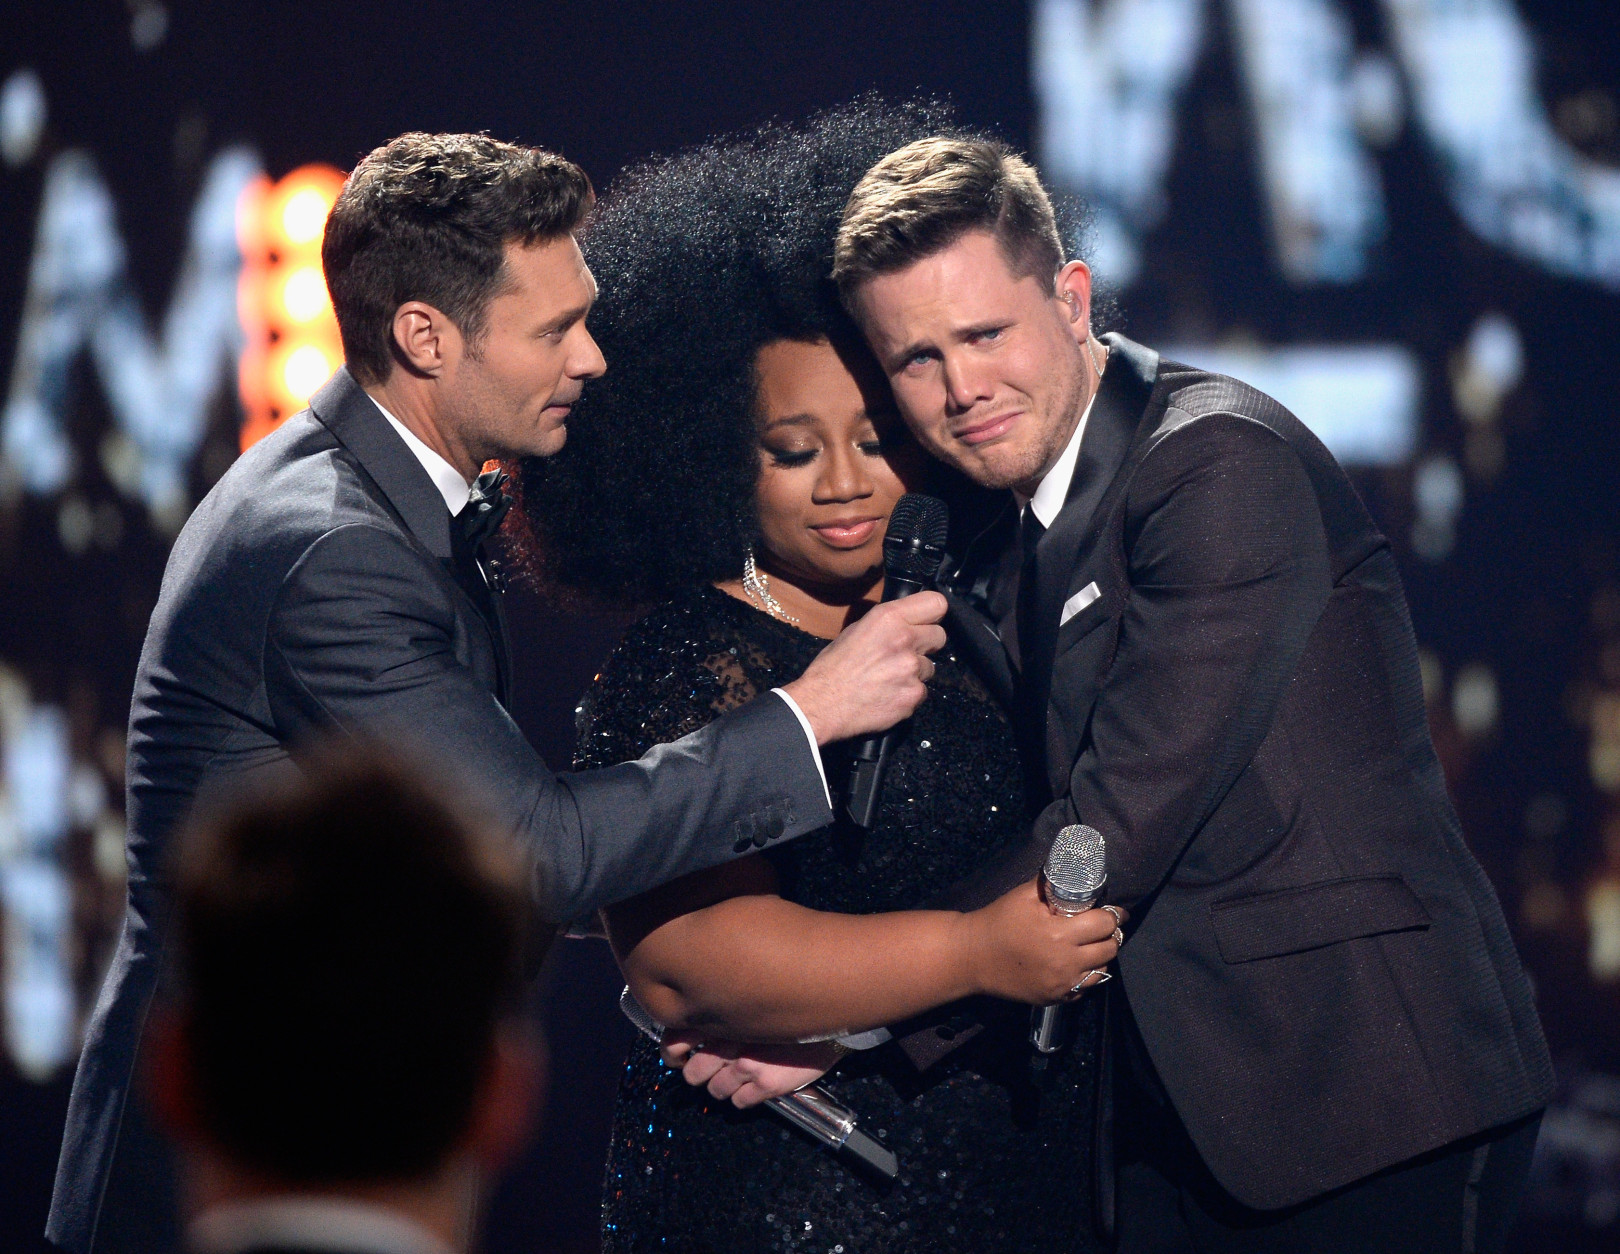 American Idol Season 15 winner Trent Harmon (R), host Ryan Seacrest (L) and finalist La'Porsha Renae speak onstage during FOX's 'American Idol' Finale For The Farewell Season at Dolby Theatre on April 7, 2016 in Hollywood, California. at Dolby Theatre on April 7, 2016 in Hollywood, California. (Photo by Kevork Djansezian/Getty Images)